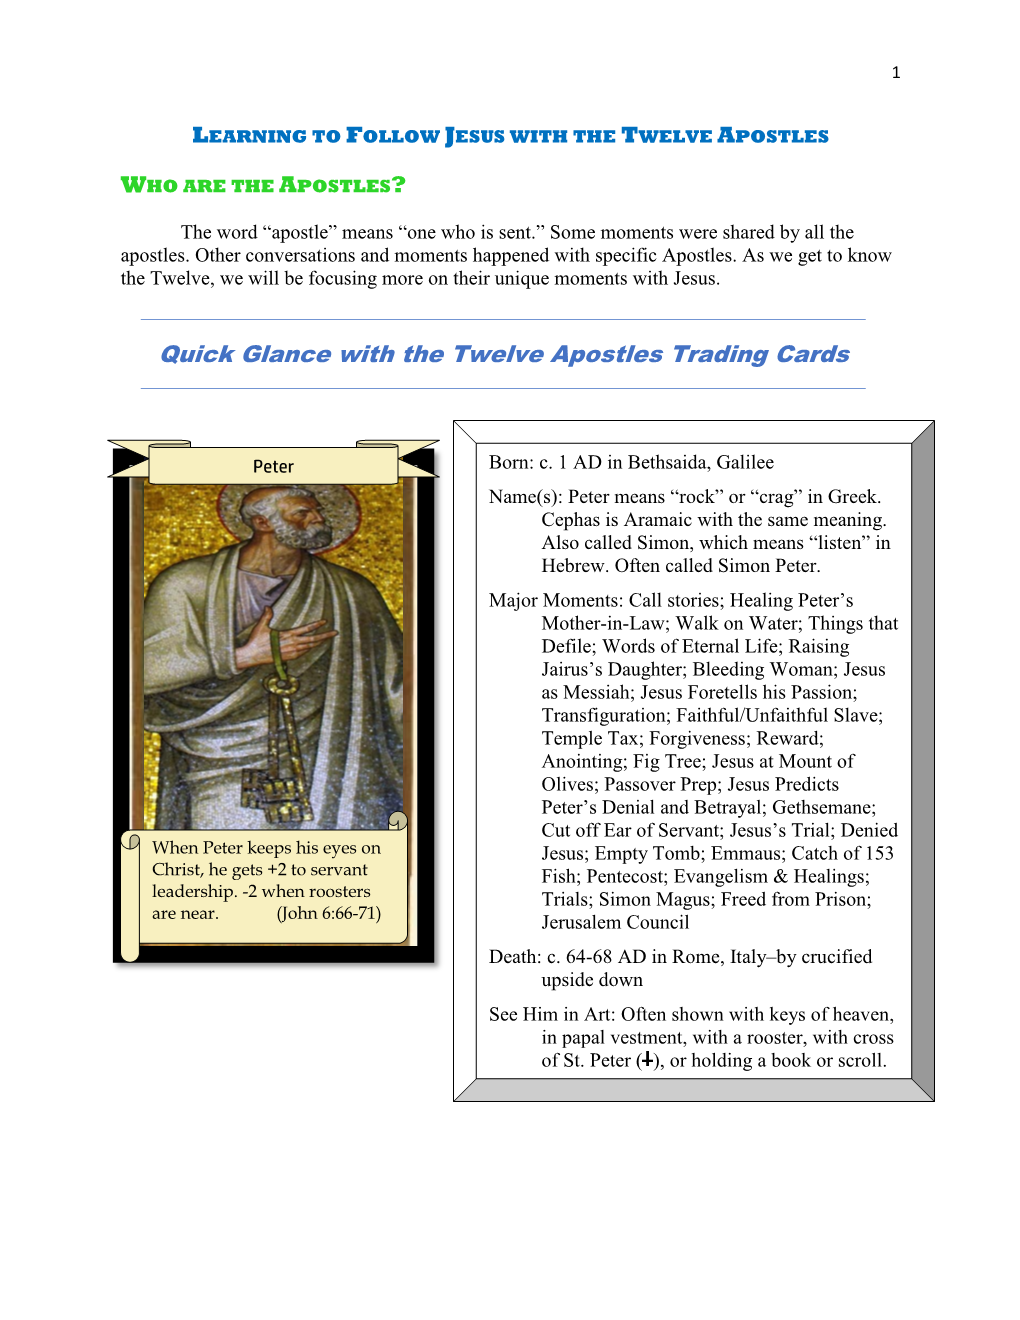 Quick Glance with the Twelve Apostles Trading Cards